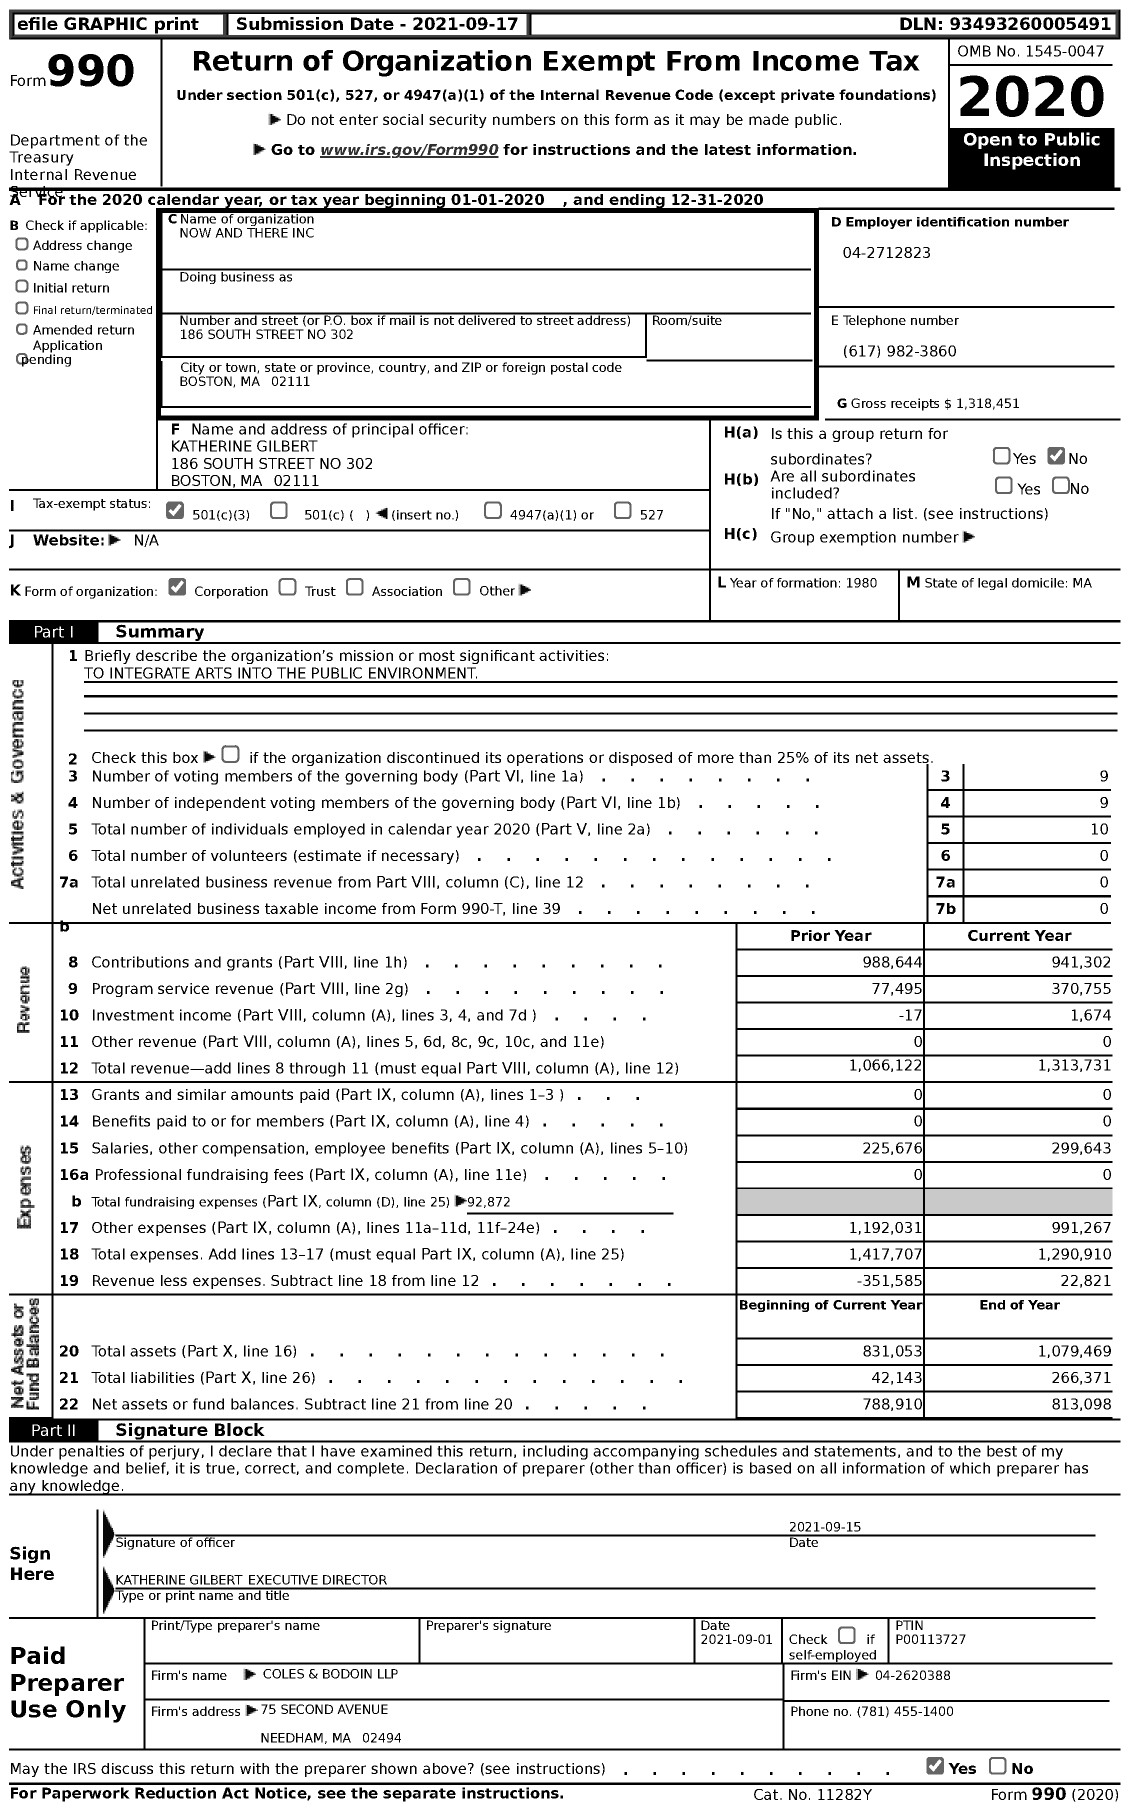 Image of first page of 2020 Form 990 for Now and There